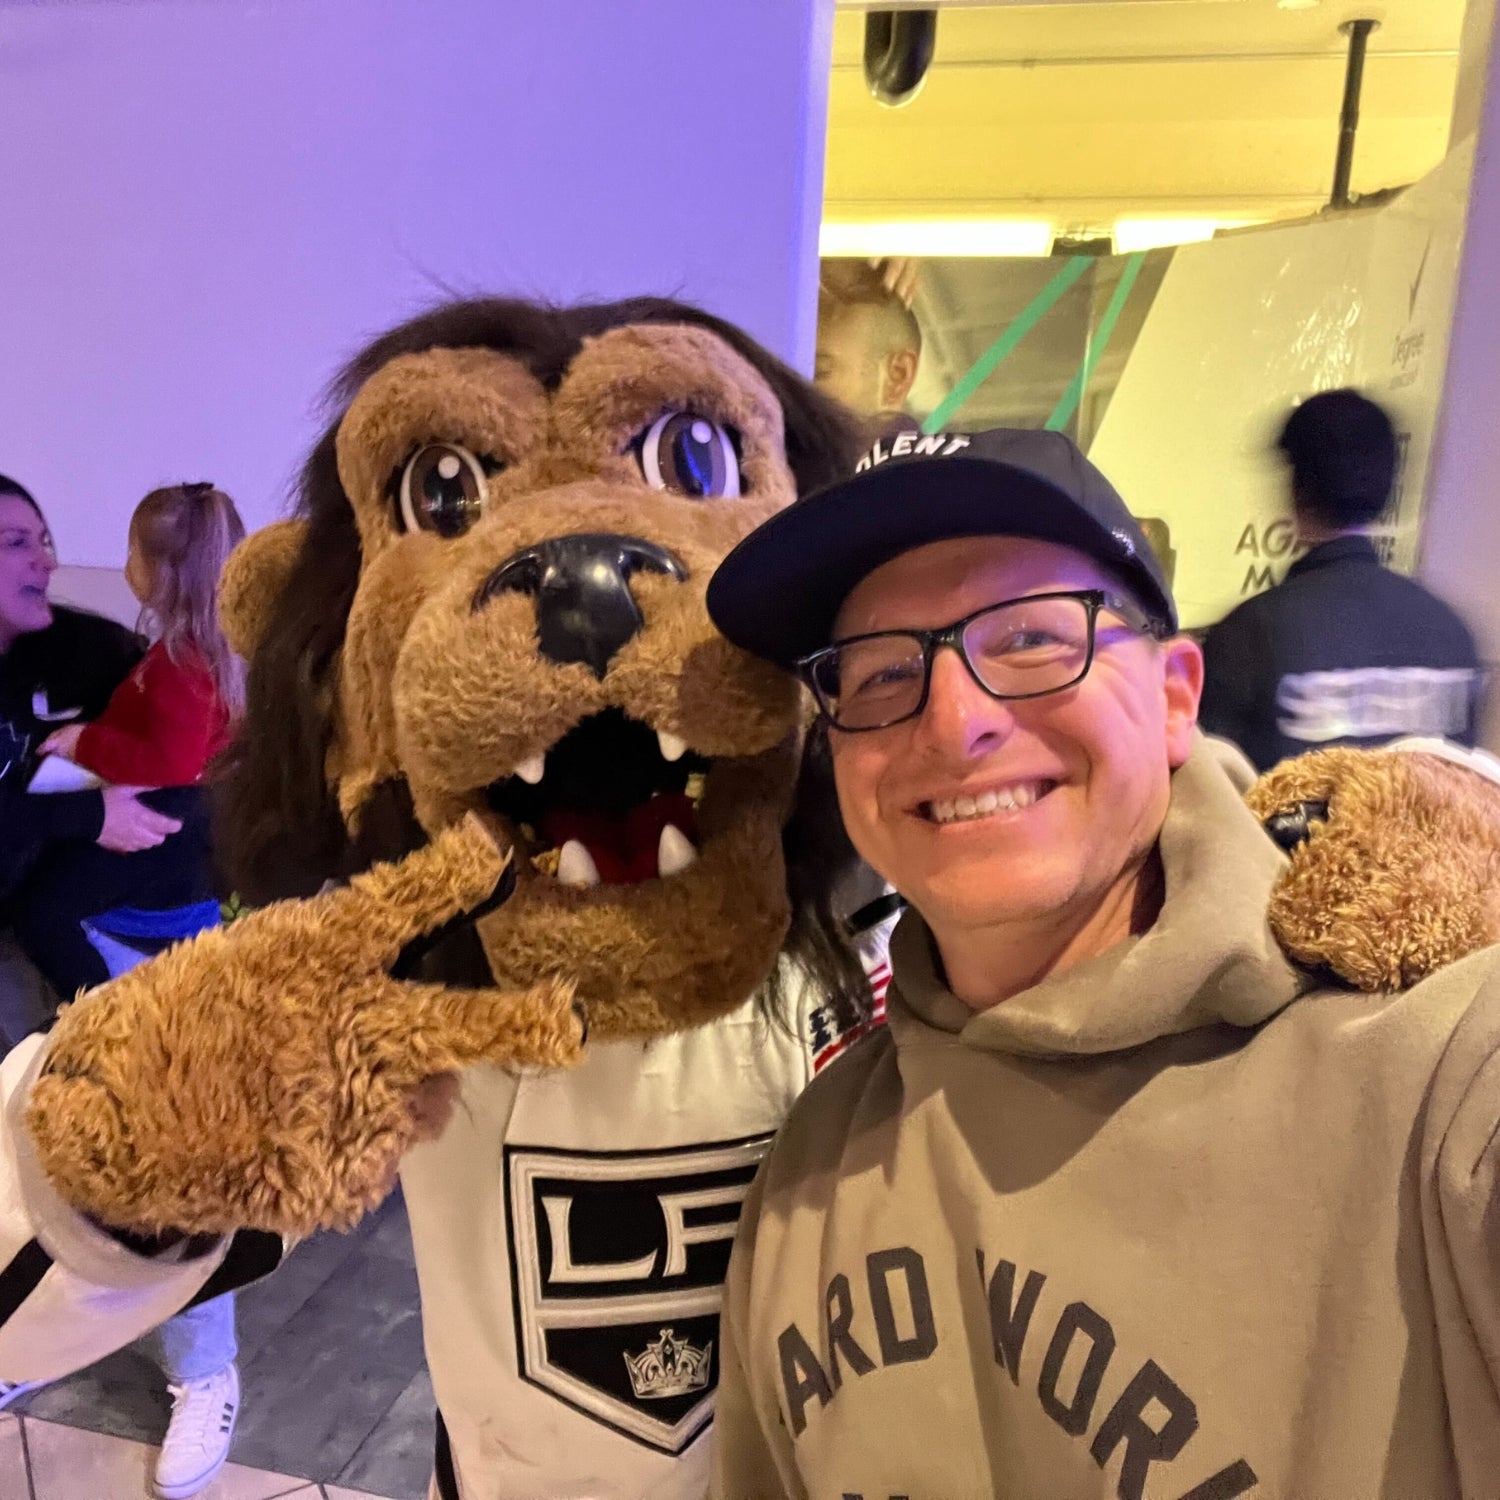 We sent some of the crew out to Toronto a few weeks ago to check out the NHL All Star game for some work and play. Safe to say the trip did not disappoint! Violent Gentlemen's very own "dad" reflects back on his trip to share some of the highlights. Check it out!